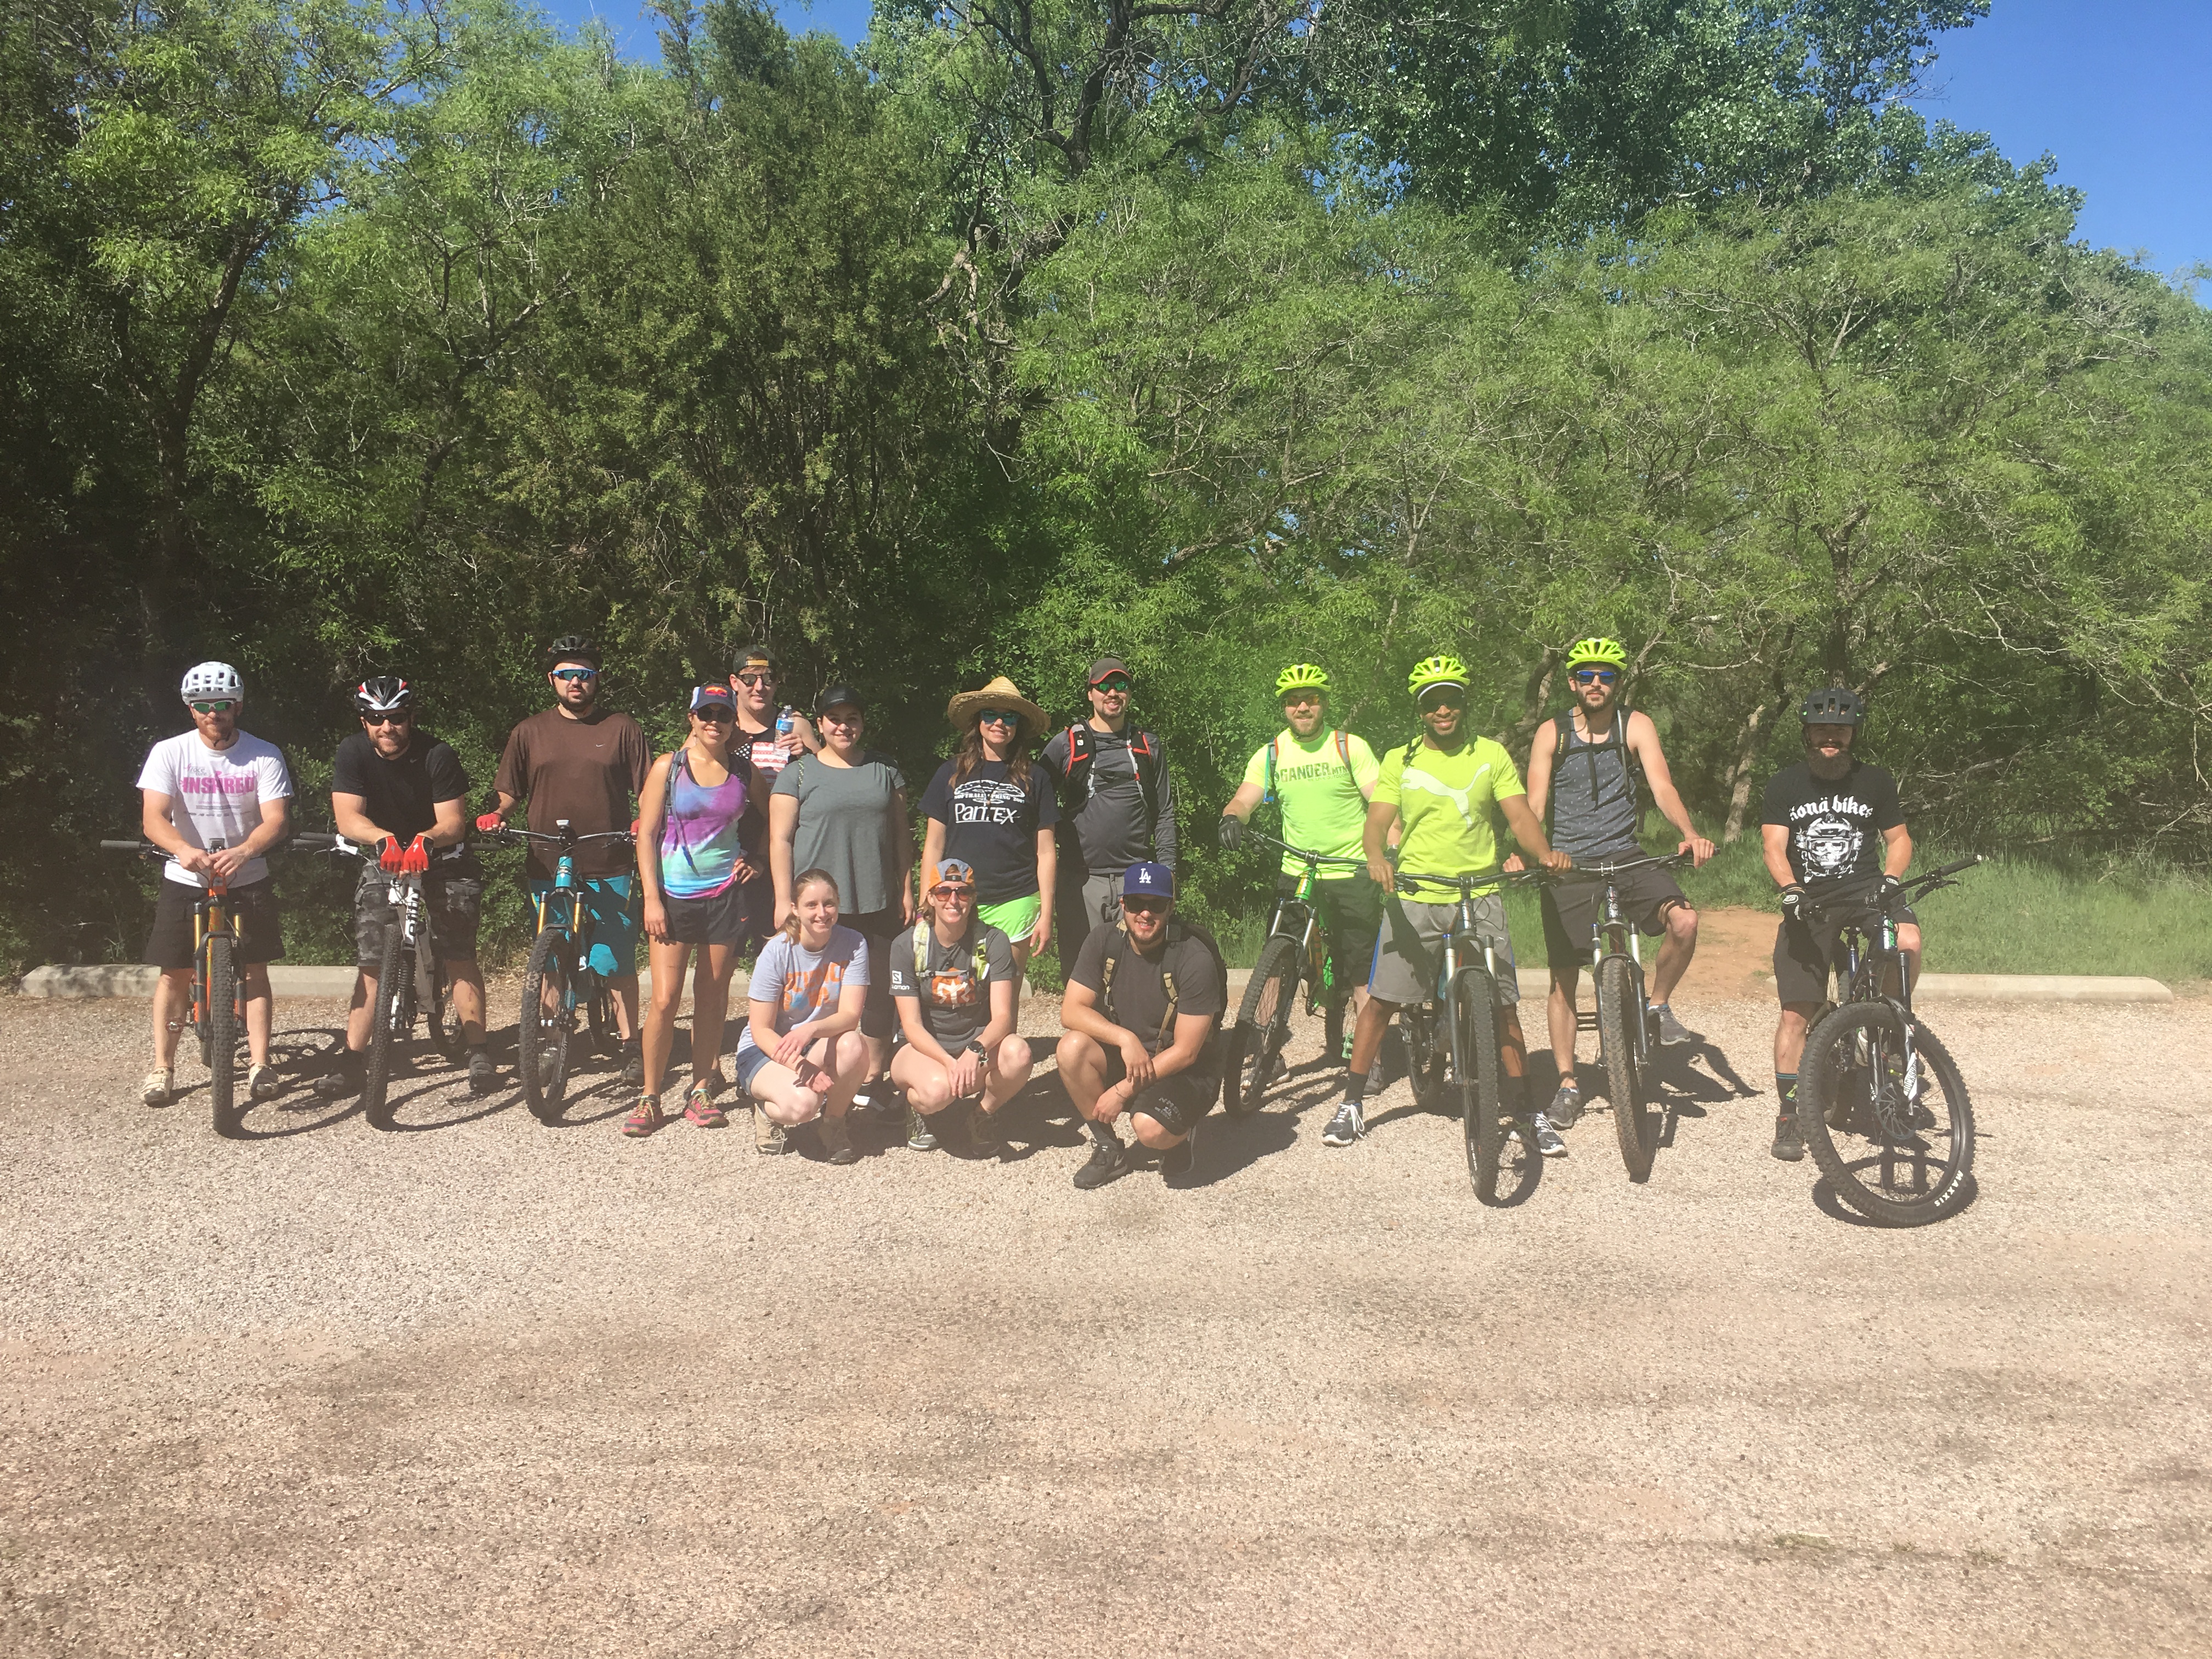 POLO group during their  Second Annual Hike and Bike at Palo Duro Canyon State Park.